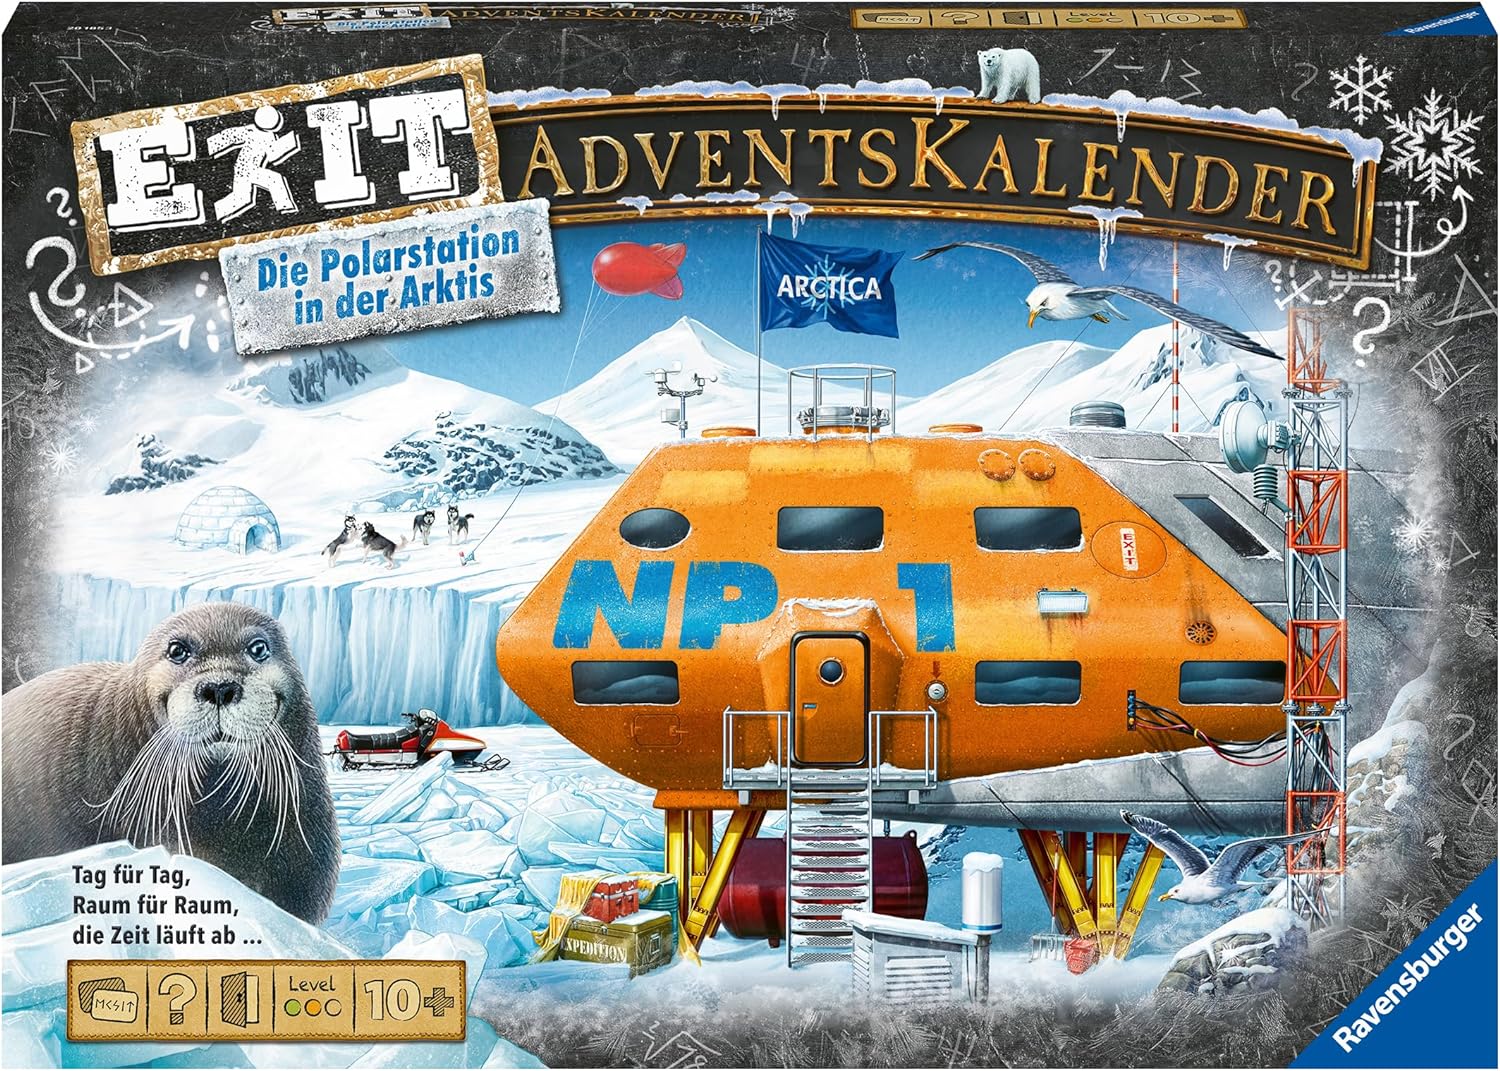 Ravensburger EXIT Advent Calendar "The Polar Station in the Arctic" - 25 Puzzles for EXIT Enthusiasts from 10 Years
